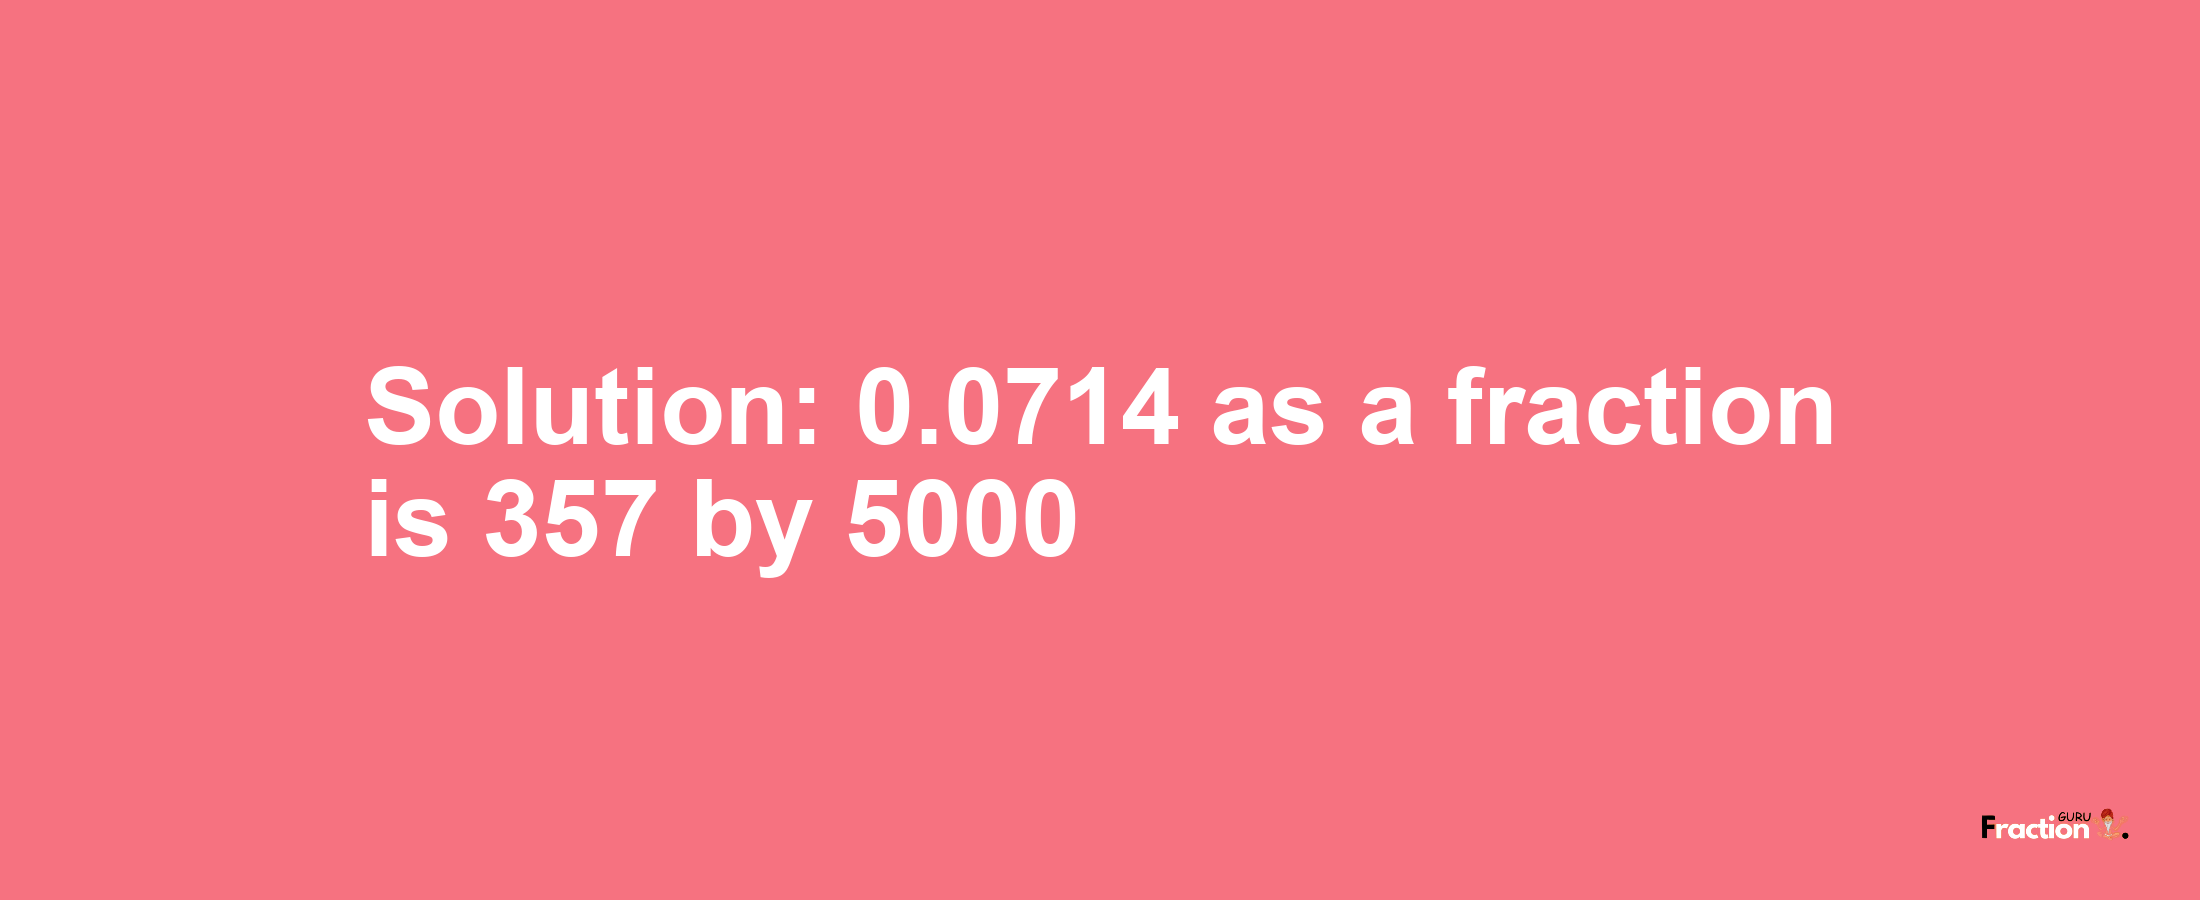 Solution:0.0714 as a fraction is 357/5000